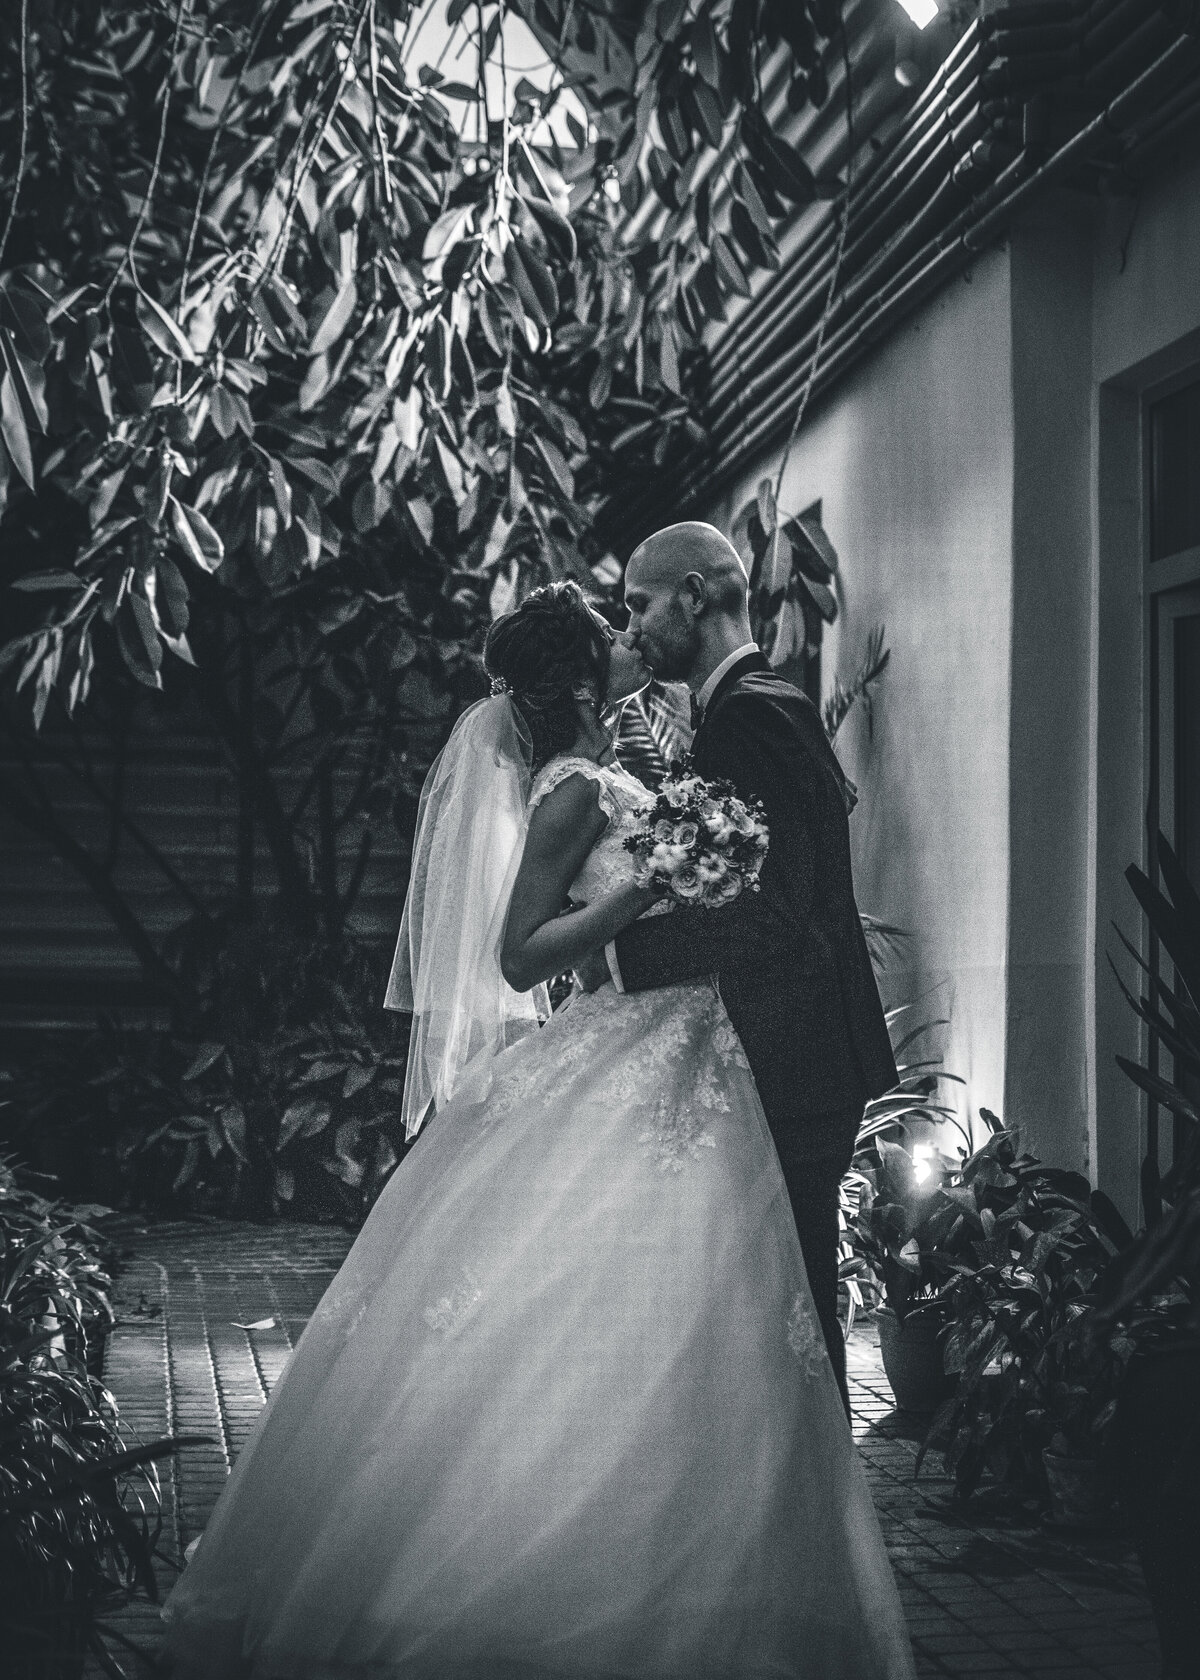 A black and white image of a bride and groom kissing on their wedding day in Italy.